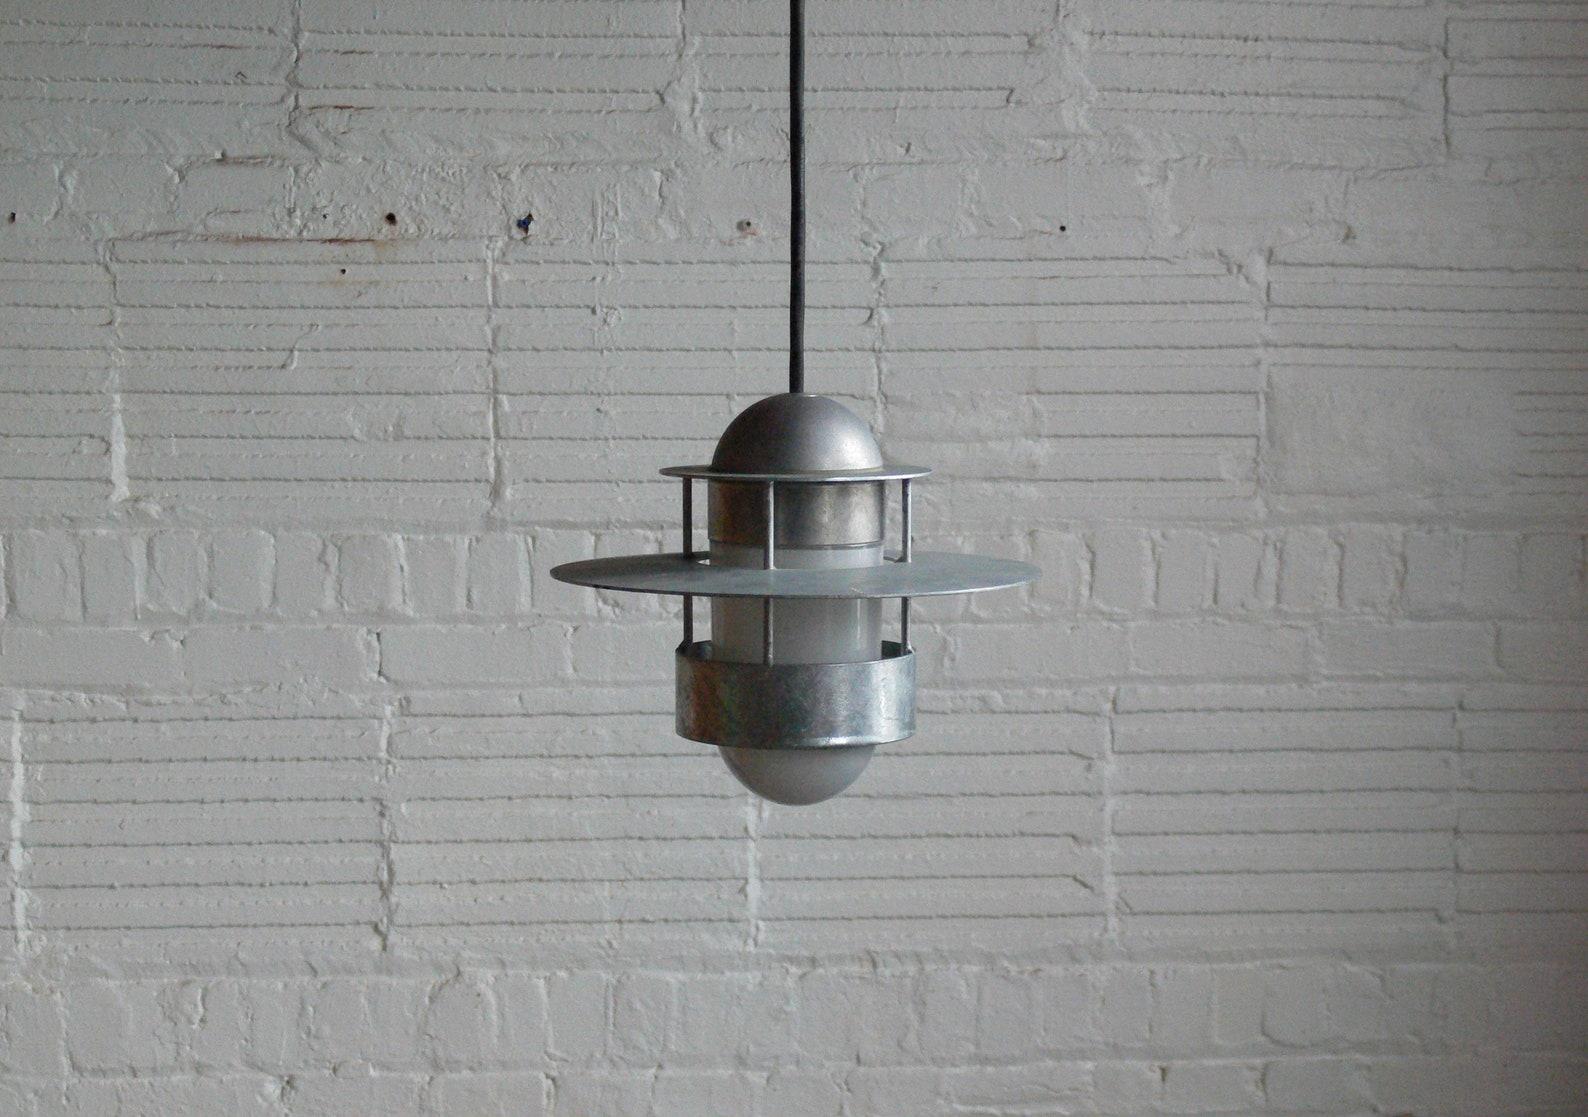 Albertson pendant lamp

Jens Møller-Jensen
Denmark, 1963

Galvanized steel ‘Albertson’ pendant lamp designed by Jens Møller-Jensen, produced with Louis Poulsen. This series was designed in Denmark of 1963 for a residential project located in